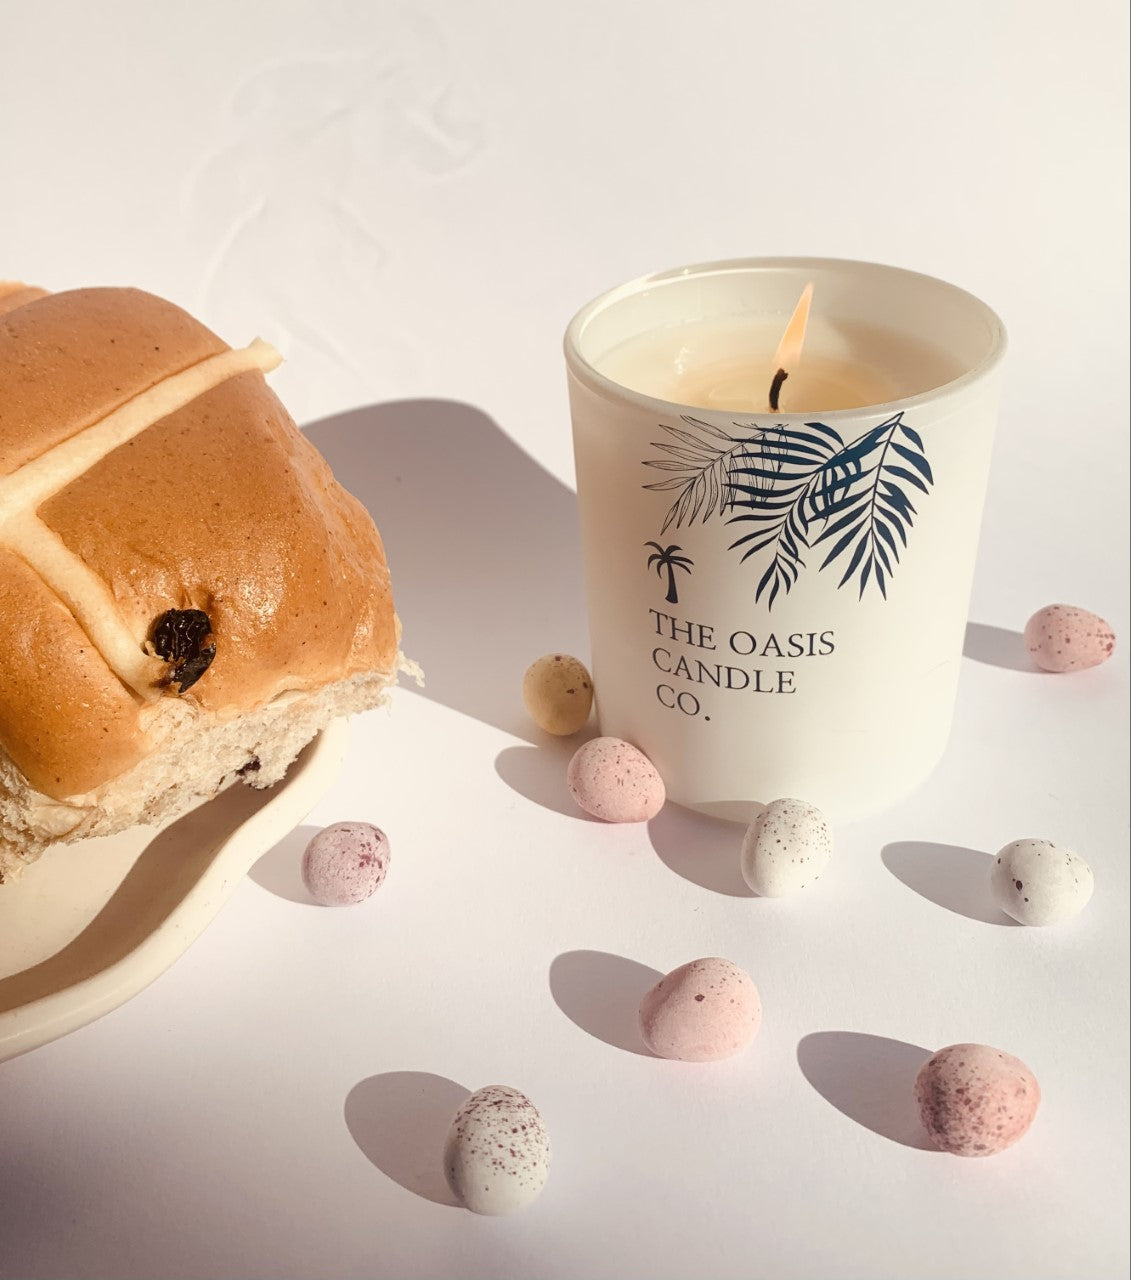 Hot Cross Buns Soy Wax Candle from The Oasis Candle Co - Candles UAE